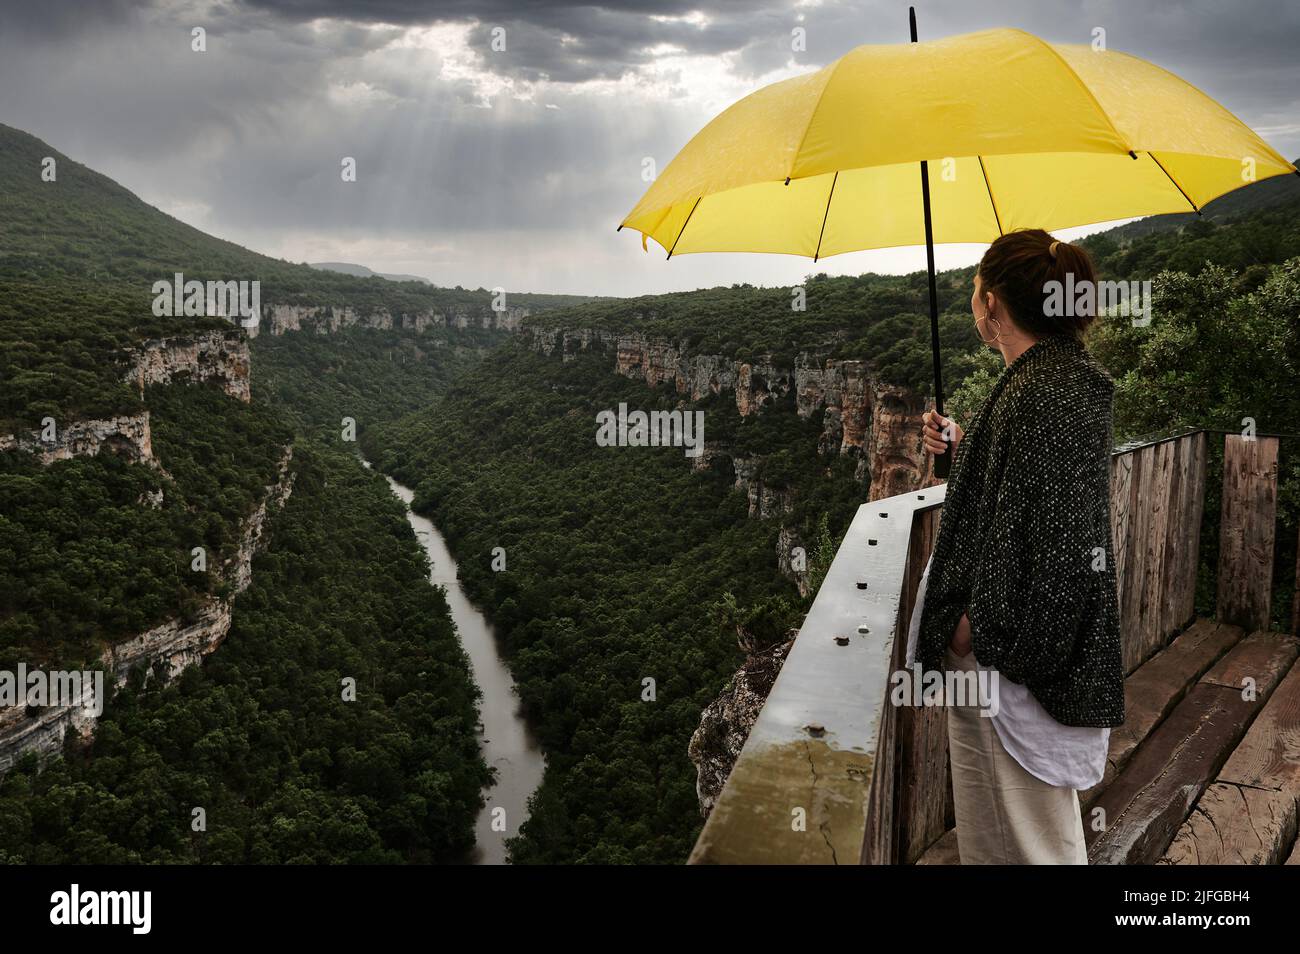 Young woman observing the Ebro river bed under a yellow umbrella on a stormy afternoon, Pesquera de Ebro, Burgos, Spain Stock Photo